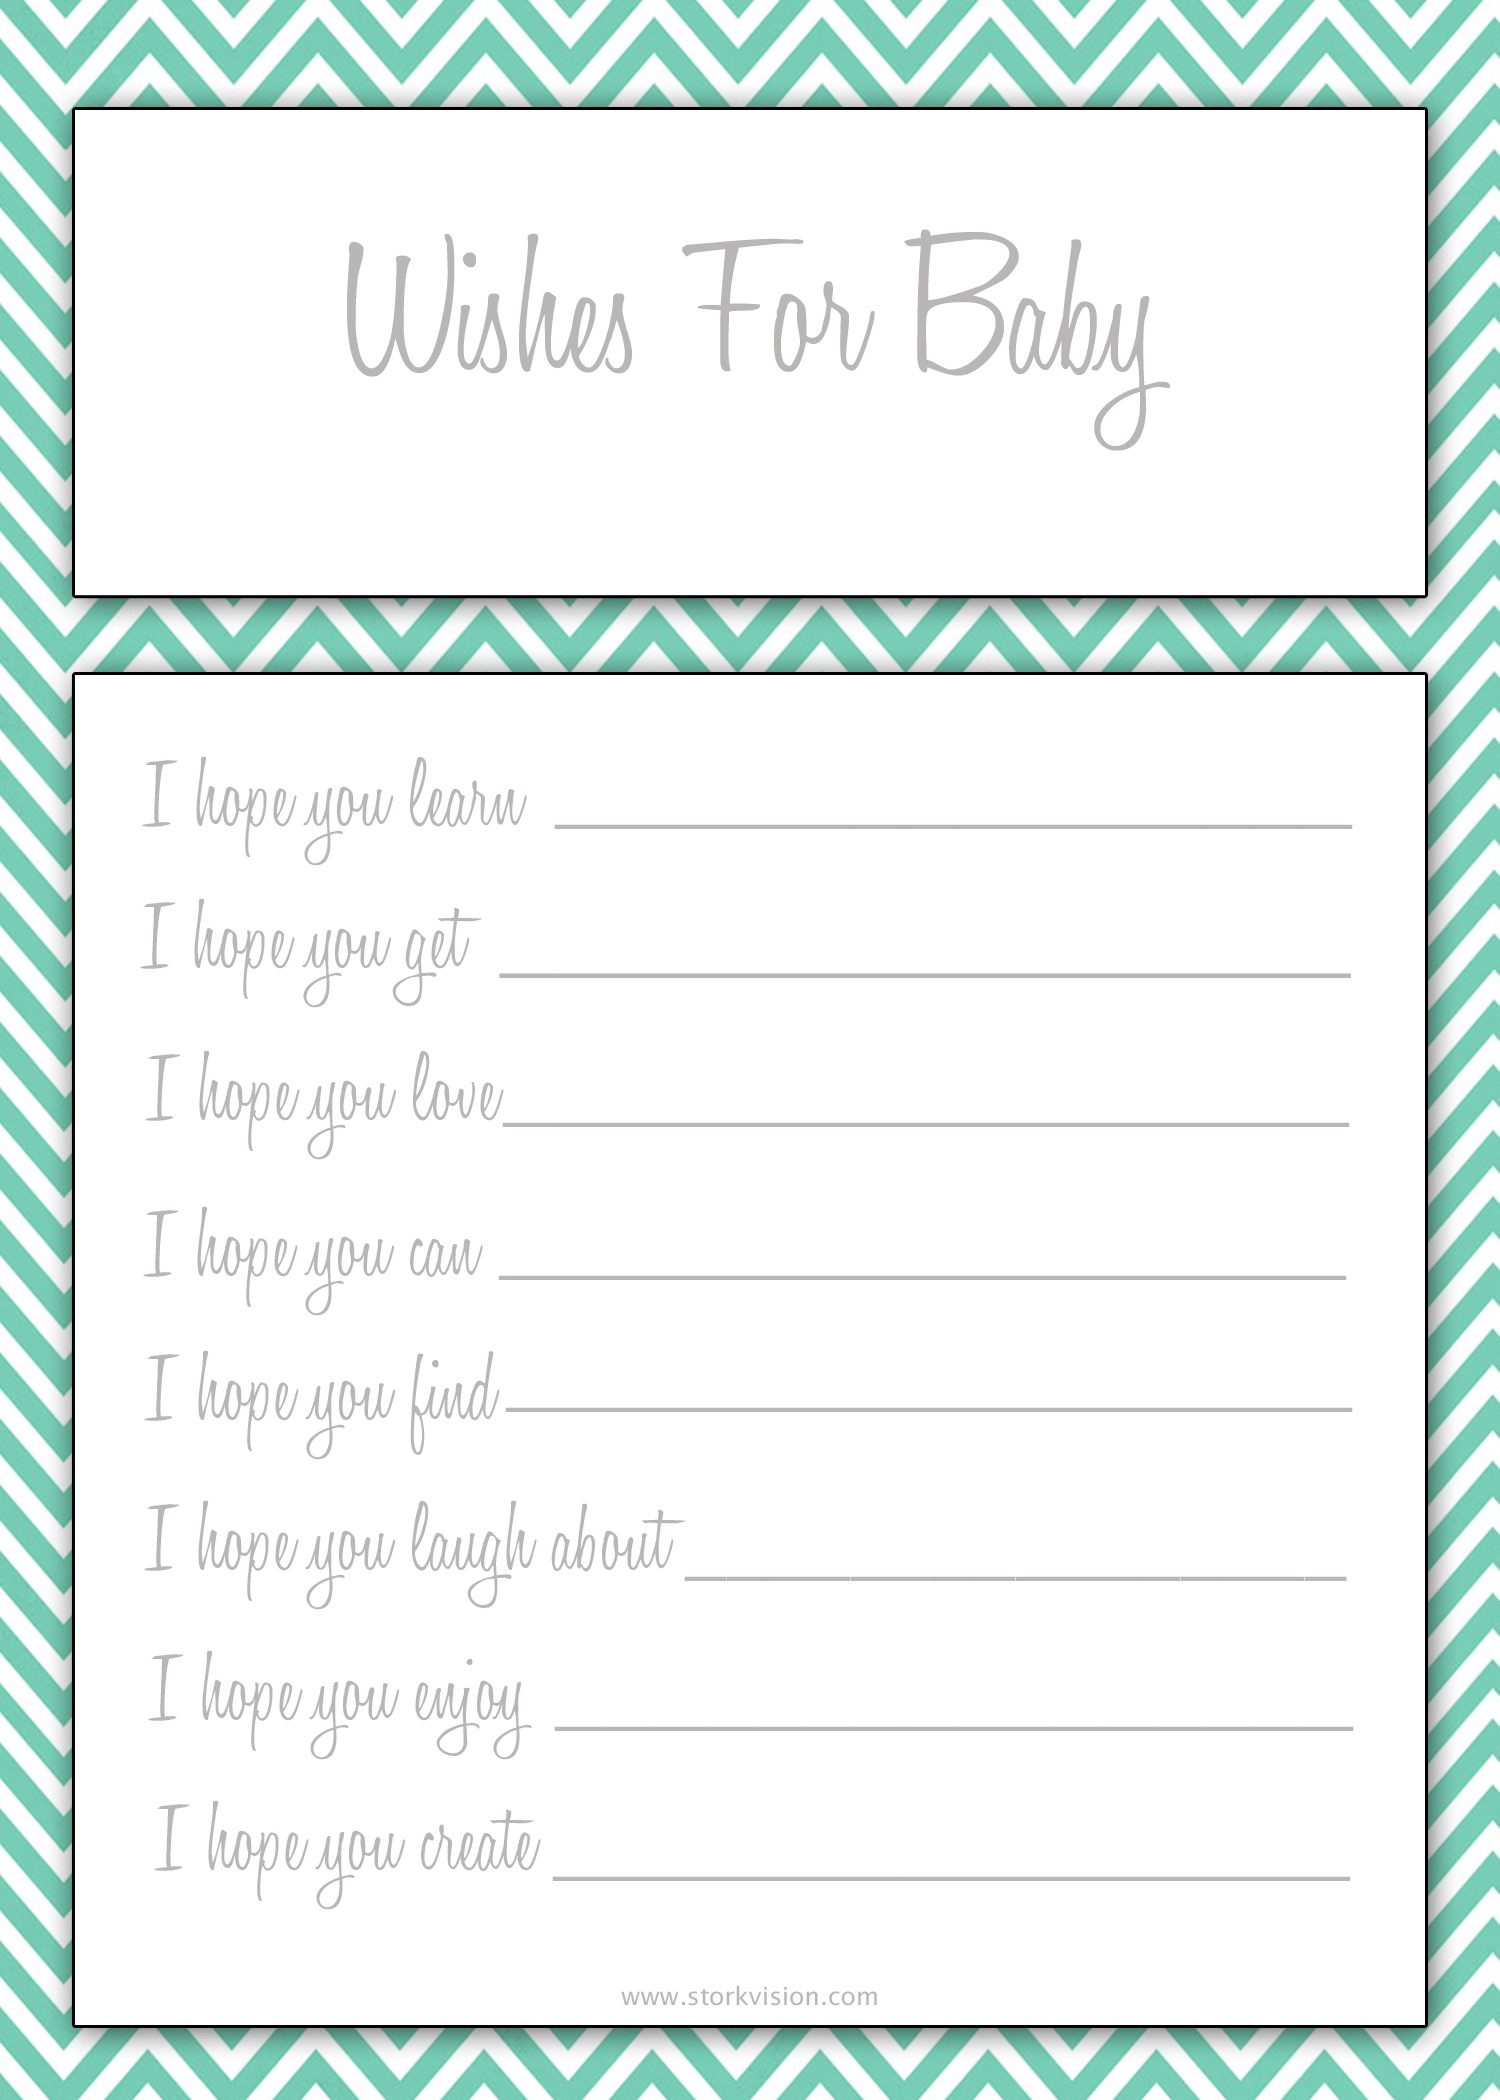 Photo : Free Baby Shower Printable Image - Free Printable Baby Shower Games For Twins